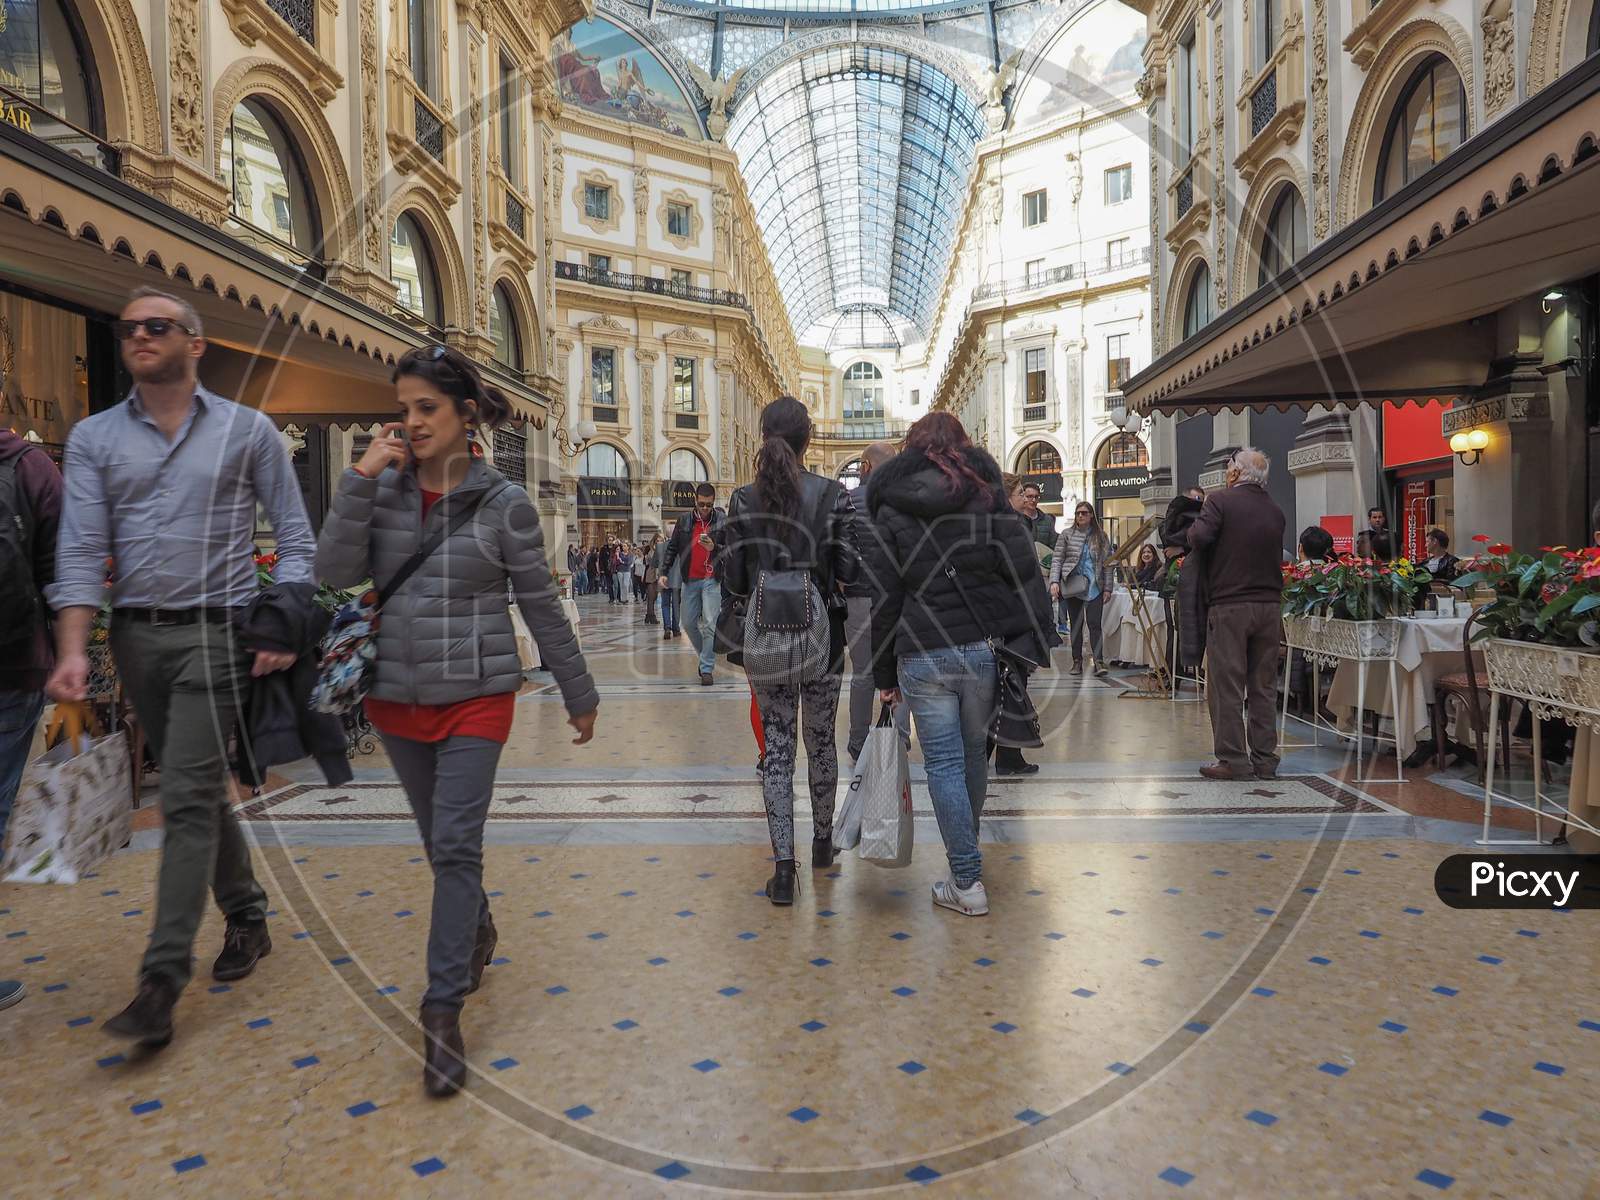 Milan, Italy - March 28, 2015: People Visiting The Newly Restored Galleria Vittorio Emanuele Ii